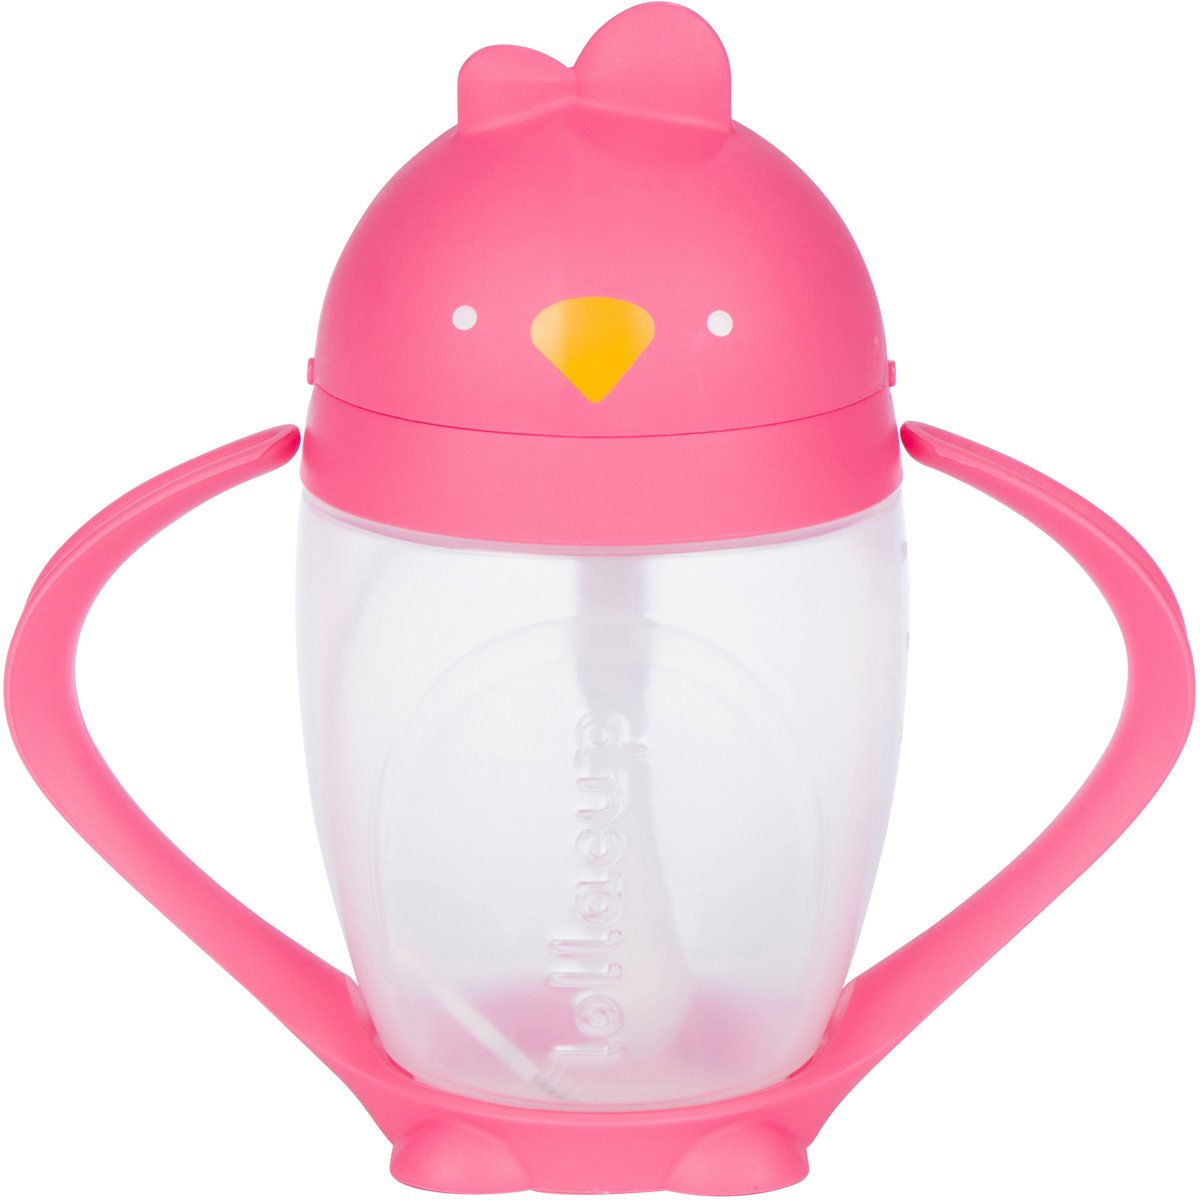 Lollaland Weighted Straw Sippy Cup for Baby: Lollacup - Transition Kids, Infant & Toddler Sippy Cup (6 months - 9 months) | Shark Tank Products | Lollacup (Posh Pink) - 100037